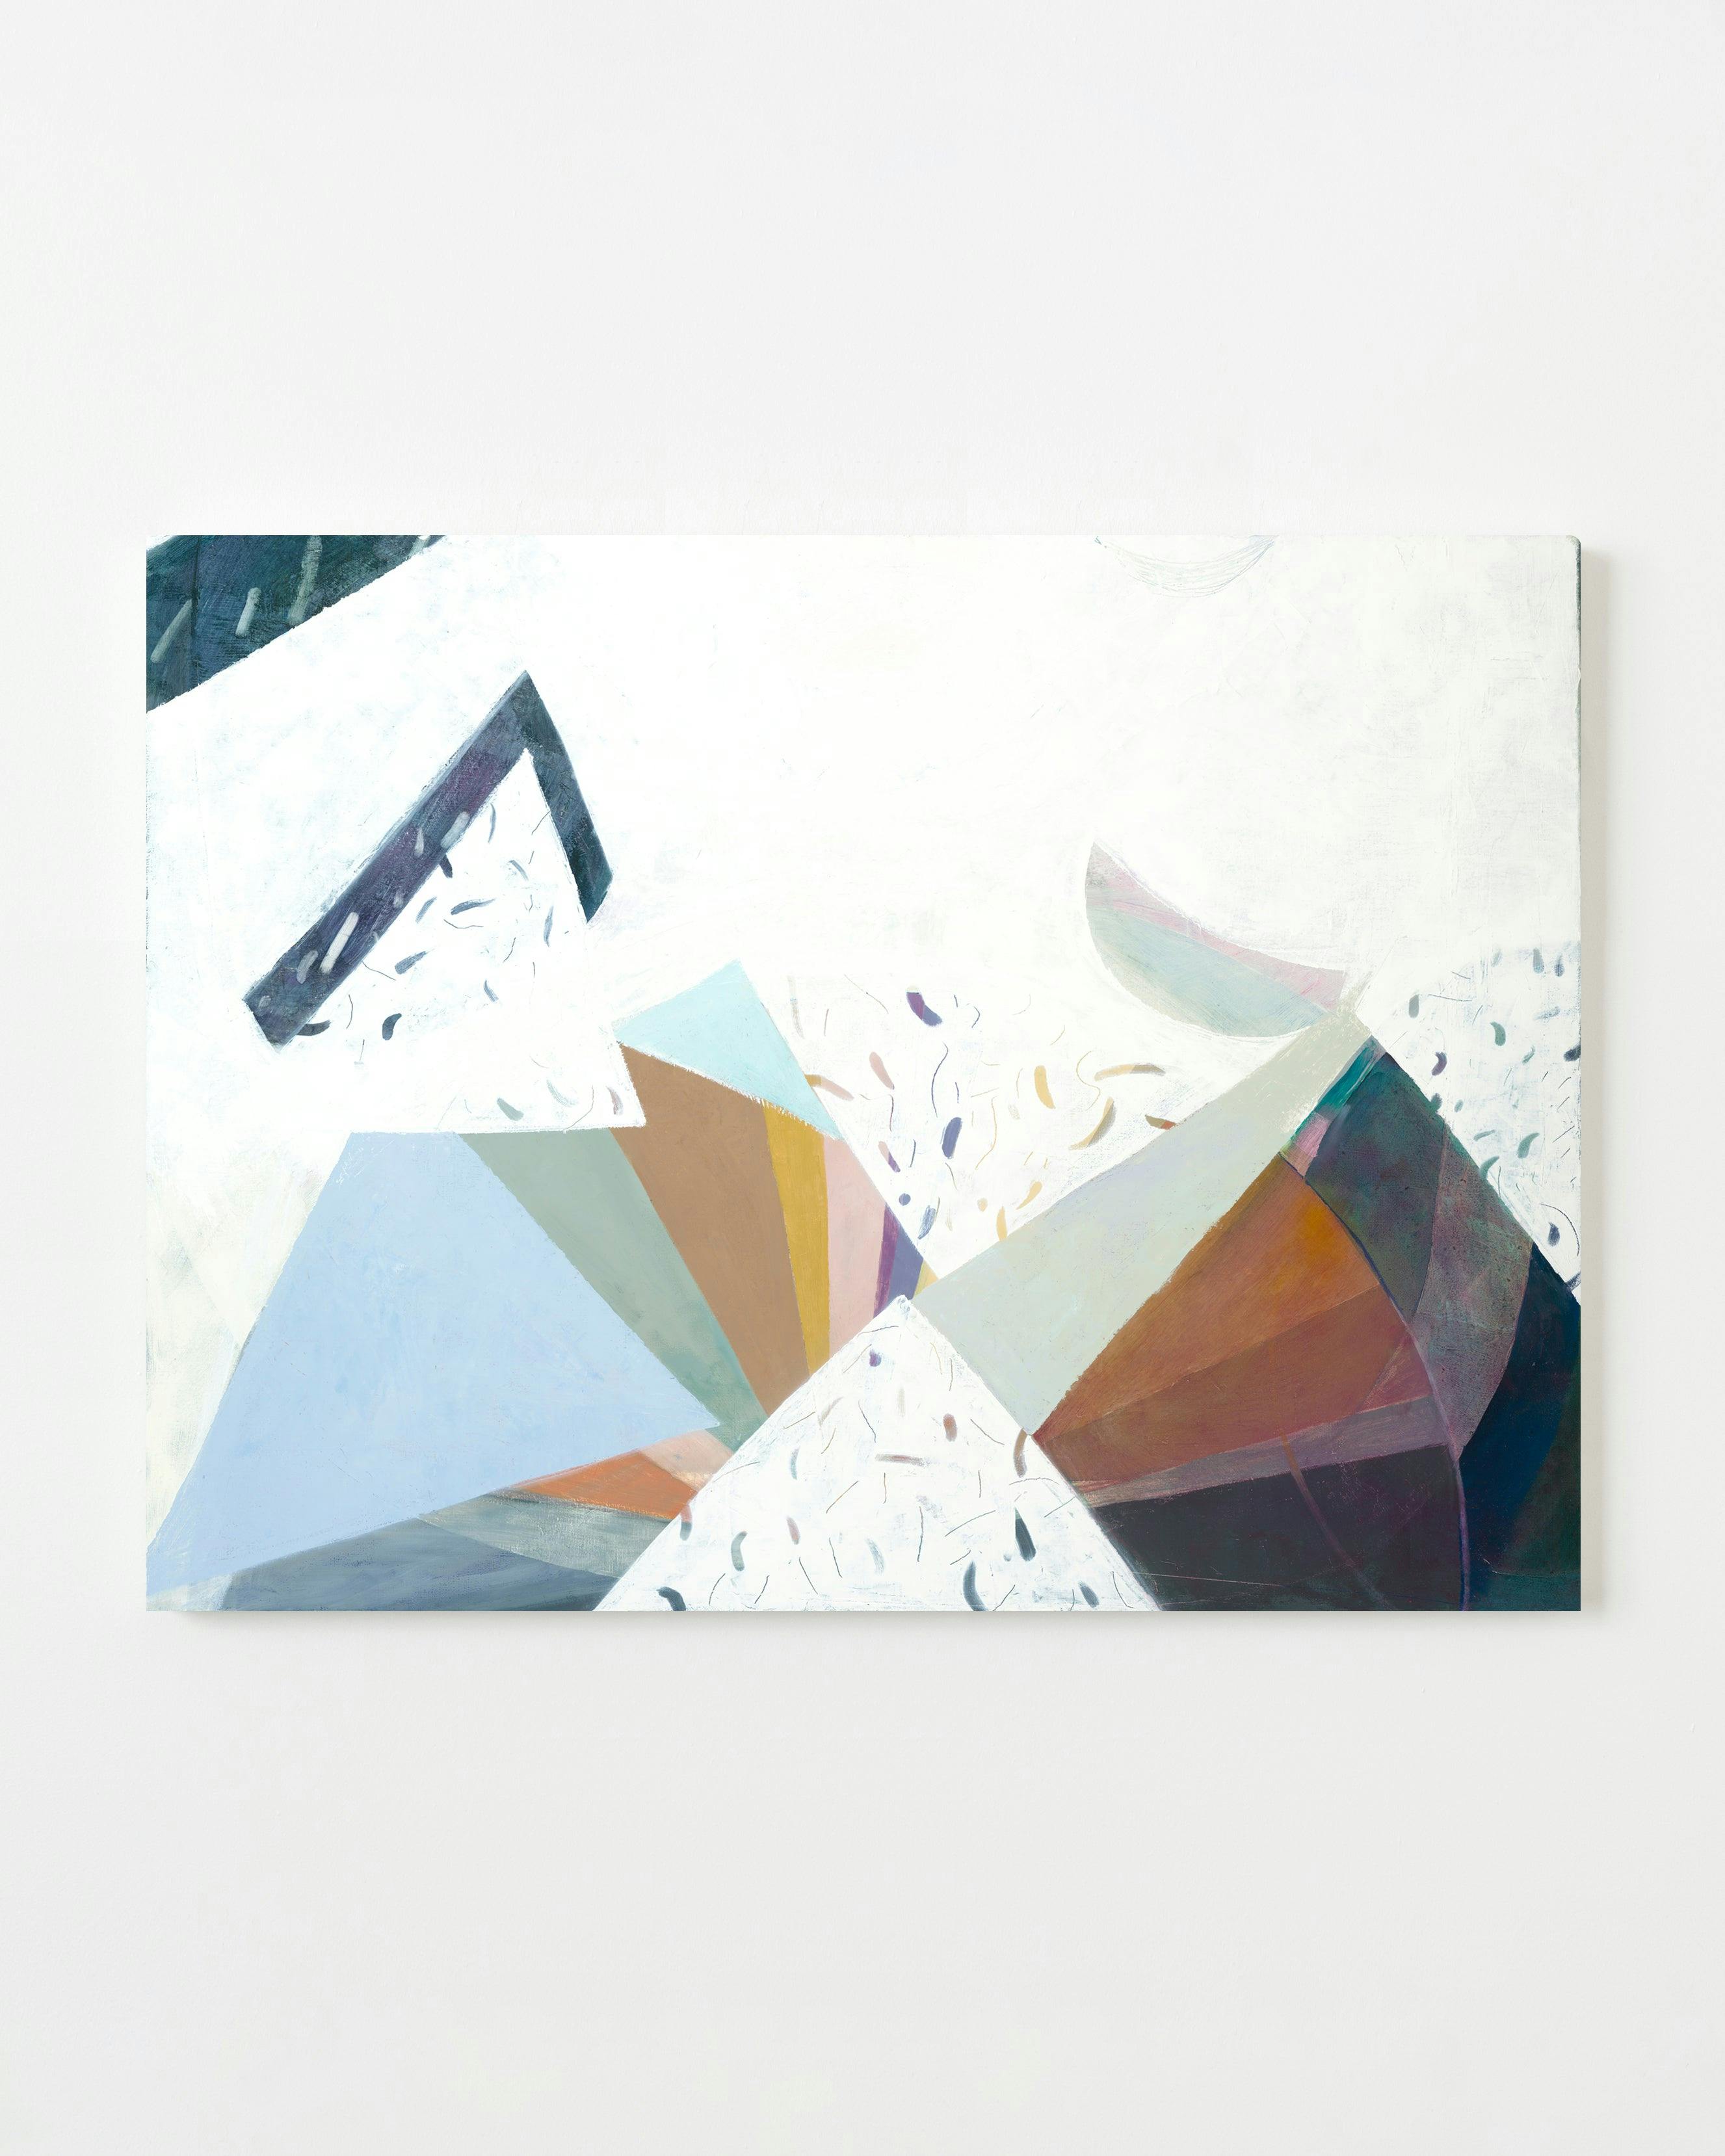 Painting by Aliza Cohen titled "Prism Moon".